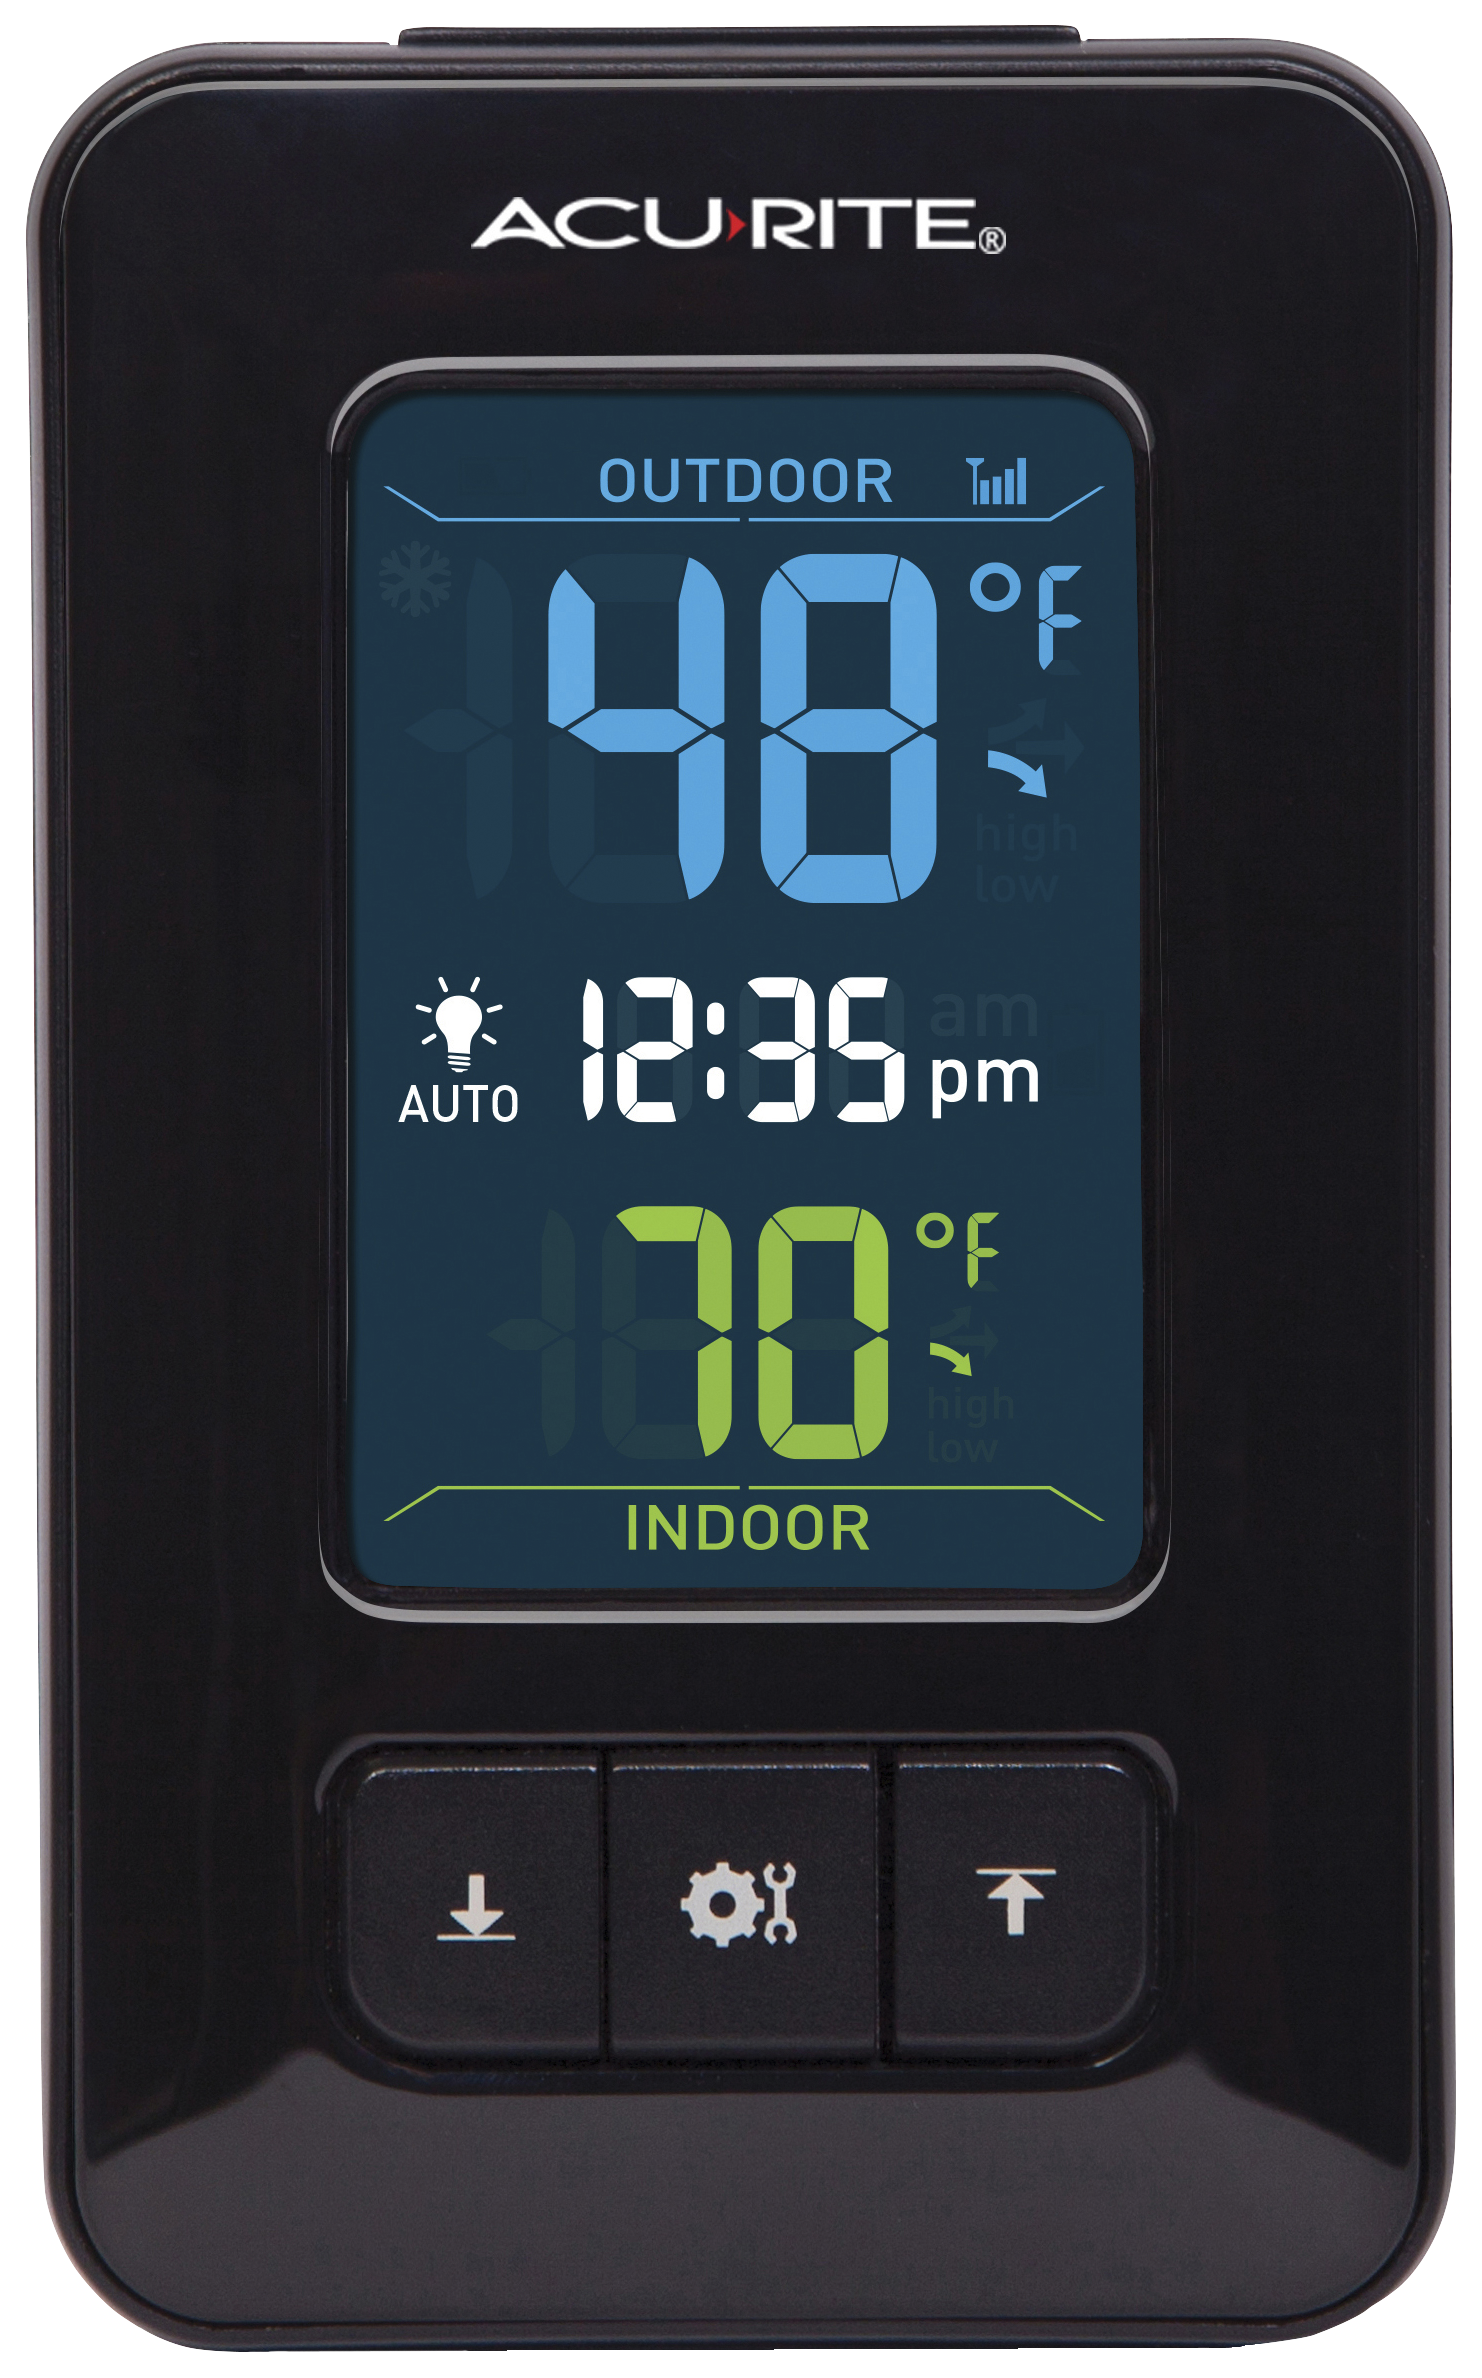 AcuRite Bass Pro Shop Acu-rite Indoor/Outdoor Thermometer 